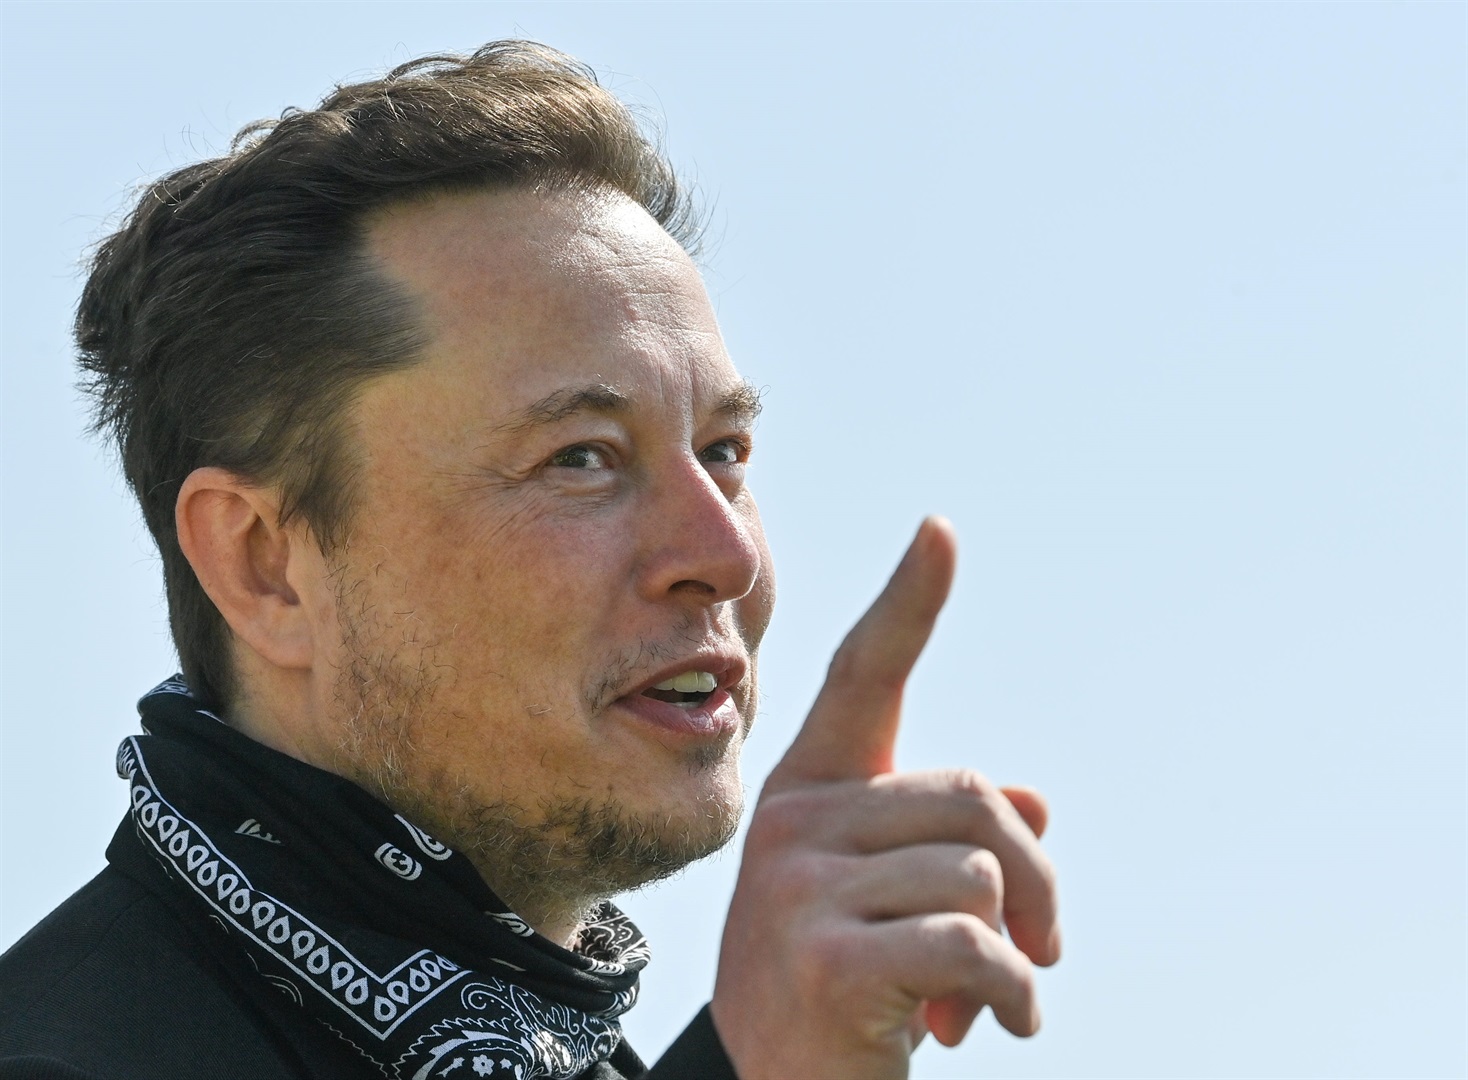 The author asks that Elon Must address issues on the African platform of Twiiter, with same vigor that he want to address issues in the European and American space. (Patrick Pleul/Pool/AFP via Getty Images)